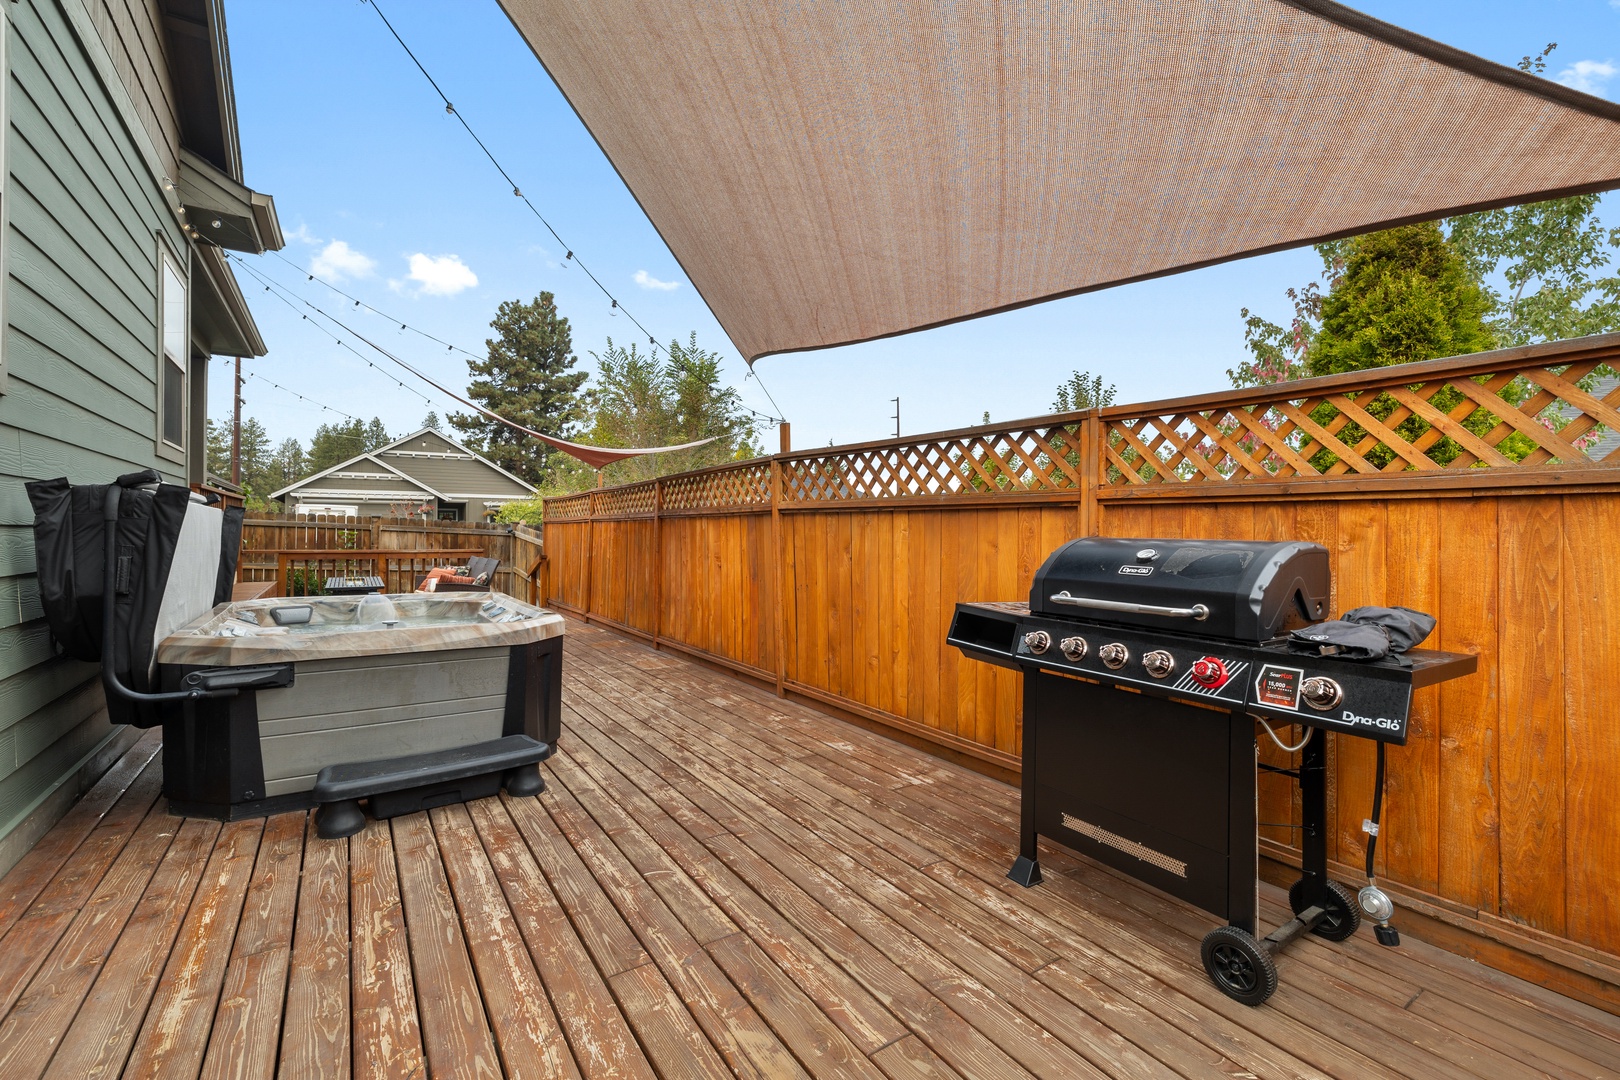 Relax in the fresh air while you grill up a feast!